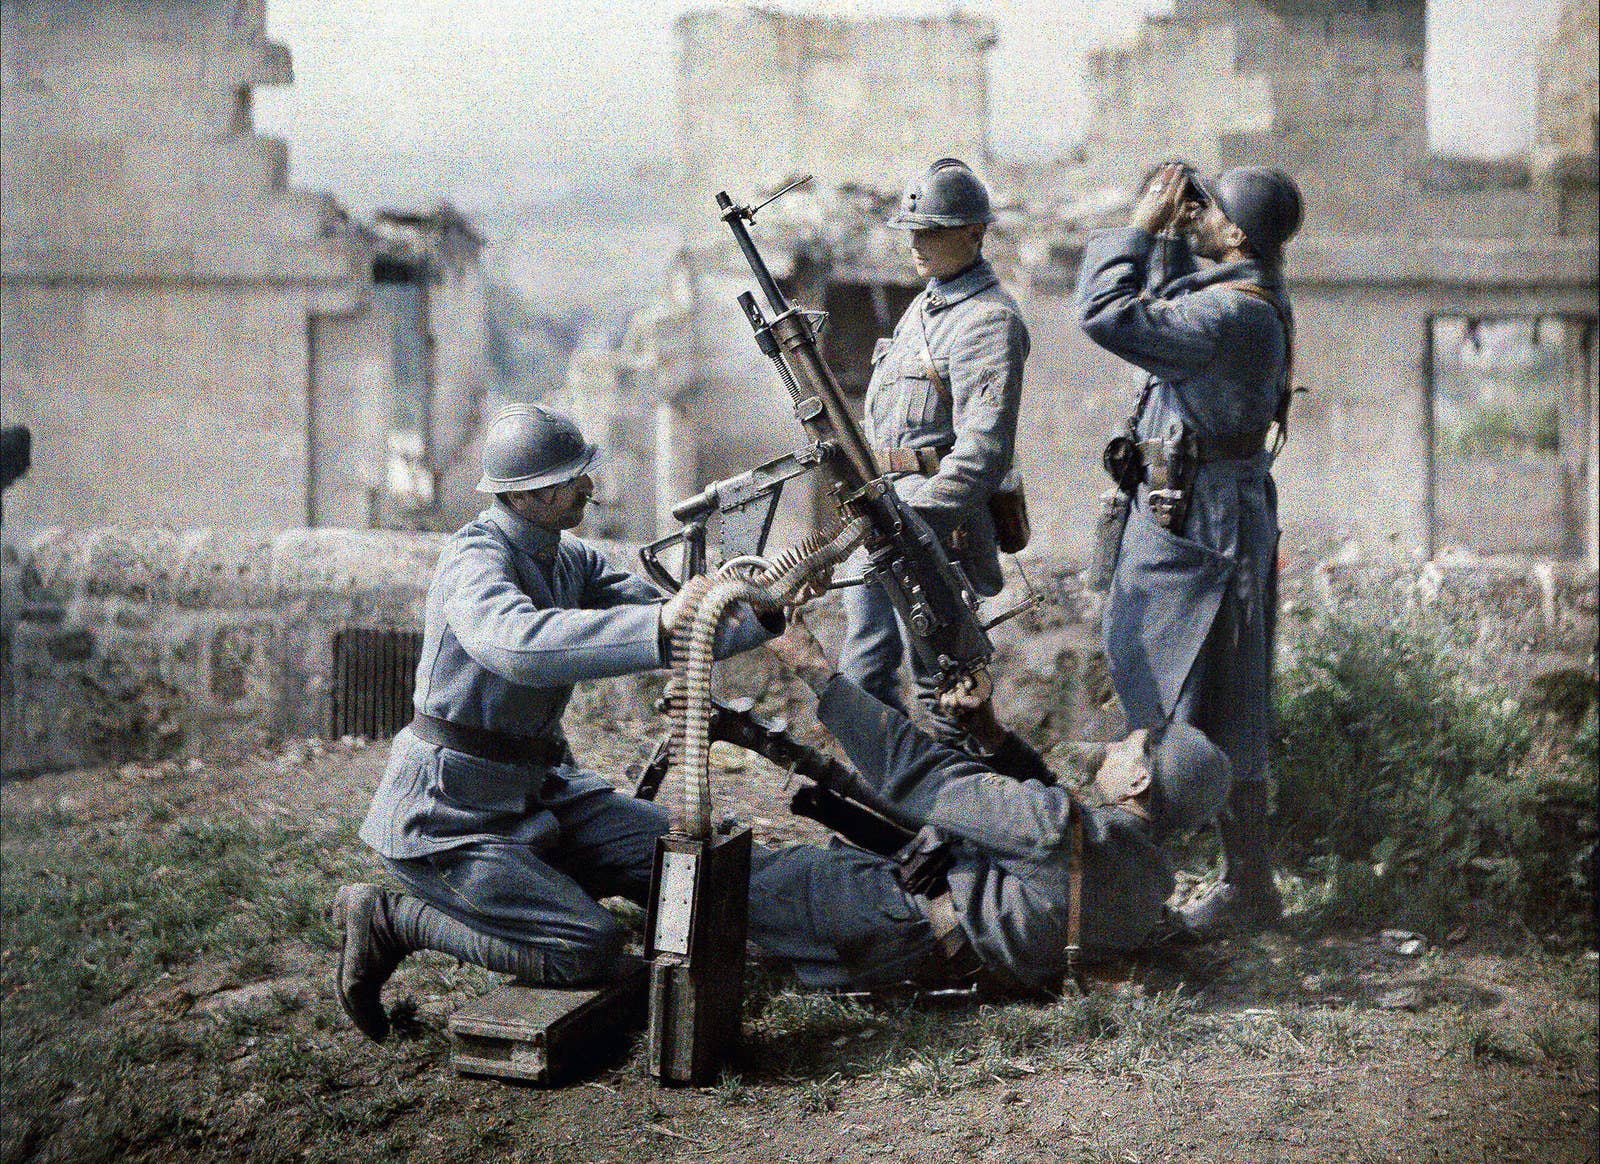 Autochrome by Fernand Cuville of French soldiers operating machine guns during the Second Battle of the Aisne, 1917.